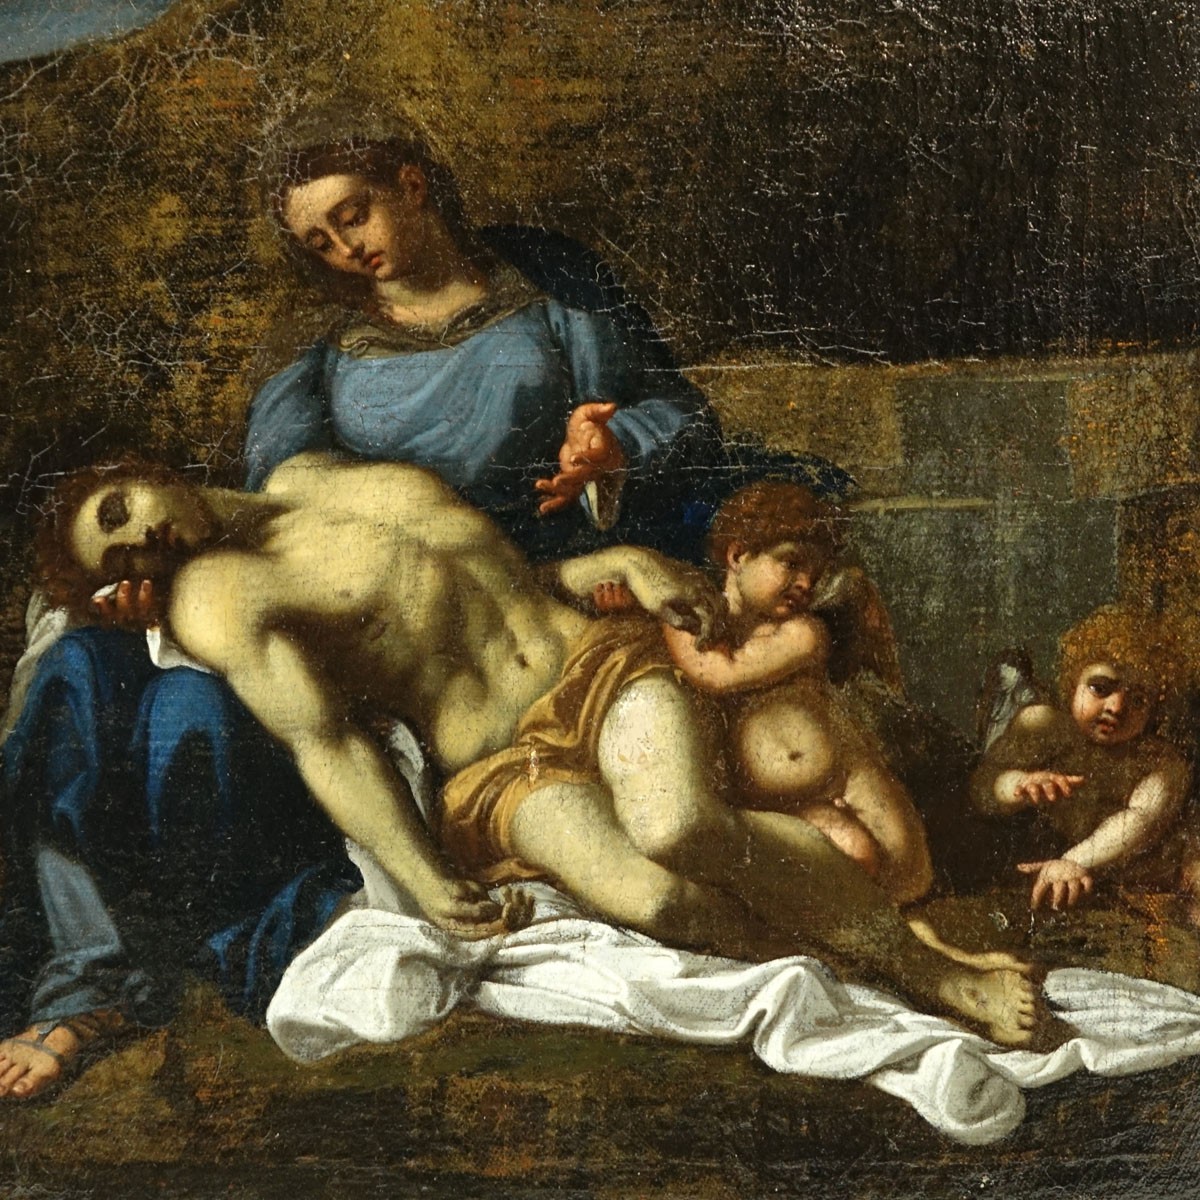 Attributed to: Annibale Carracci, Italian (1560 - 1609) Oil on Canvas "Pieta", label inscribed 'Hanibal Carracci' en verso. Conserved condition, varnish throughout, darkening, paint loss and in-painting.